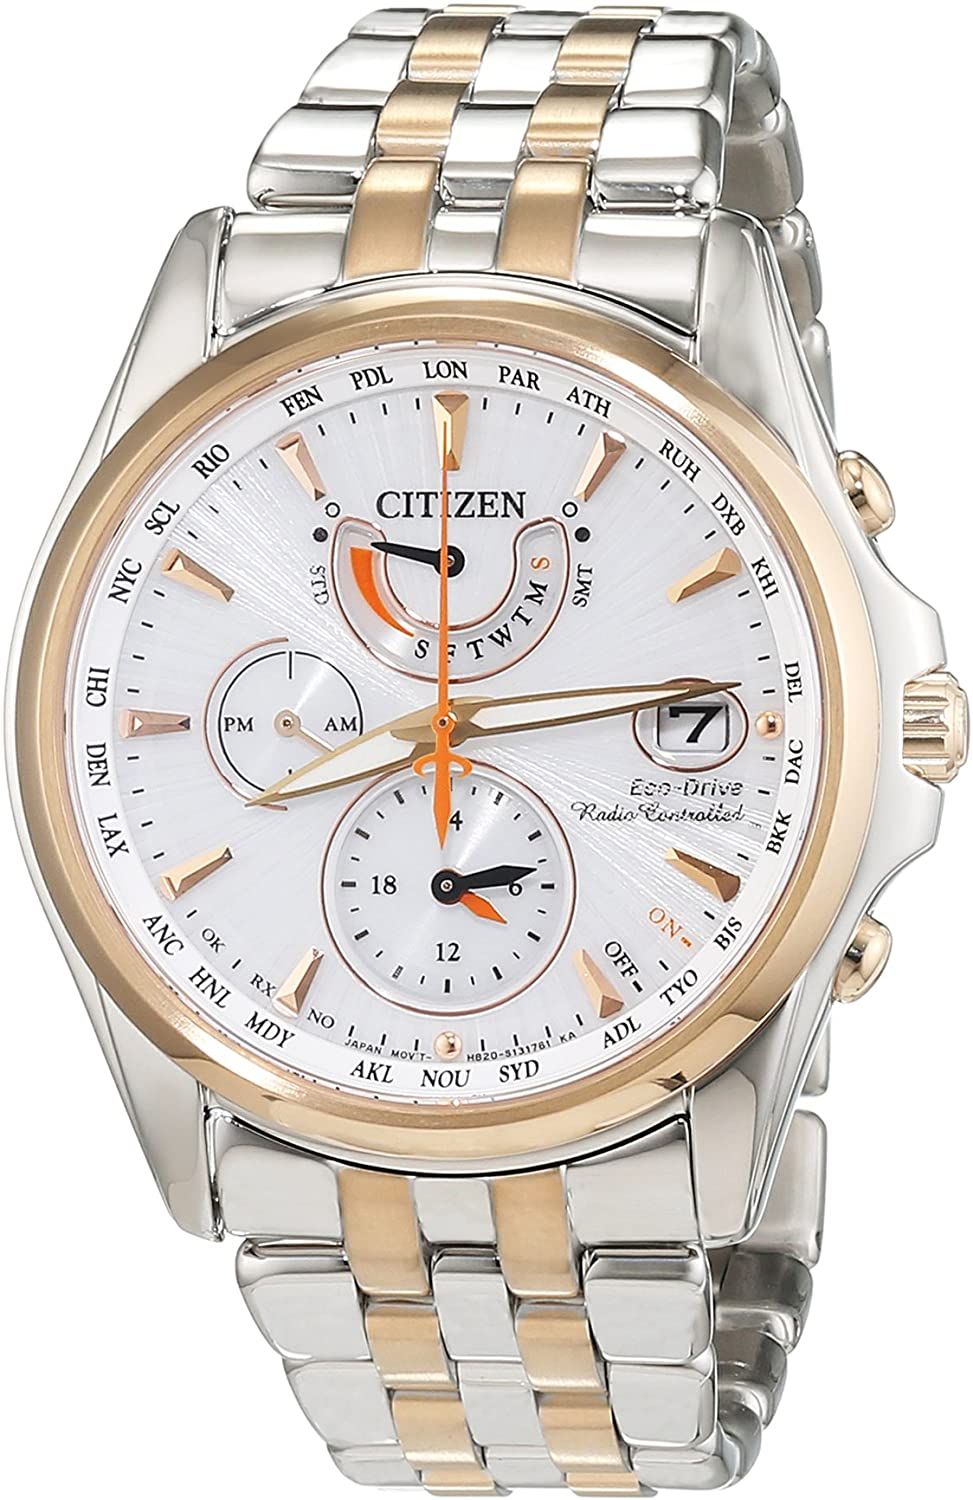 This Citizen  Multi Dial Watch for Women is the perfect timepiece to wear or to gift. It's Multicolour 38 mm Round case combined with the comfortable Multicolour Stainless steel will ensure you enjoy this stunning timepiece without any compromise. Operated by a high quality Eco-Drive movement and water resistant to 10 bars, your watch will keep ticking. This high quality watch has an Eco-drive technology (Recharged by any light source; no need for ever a battery) - The watch has a Calendar function: Day-Date, Radio Controlled, Solar Powered, 24-hour Display, Worldtime, Luminous Hands High quality 19 cm length and 20 mm width Multicolour Stainless steel strap with a Deployment clasp Case diameter: 38 mm,case thickness: 10 mm, case colour: Multicolour and dial colour: White